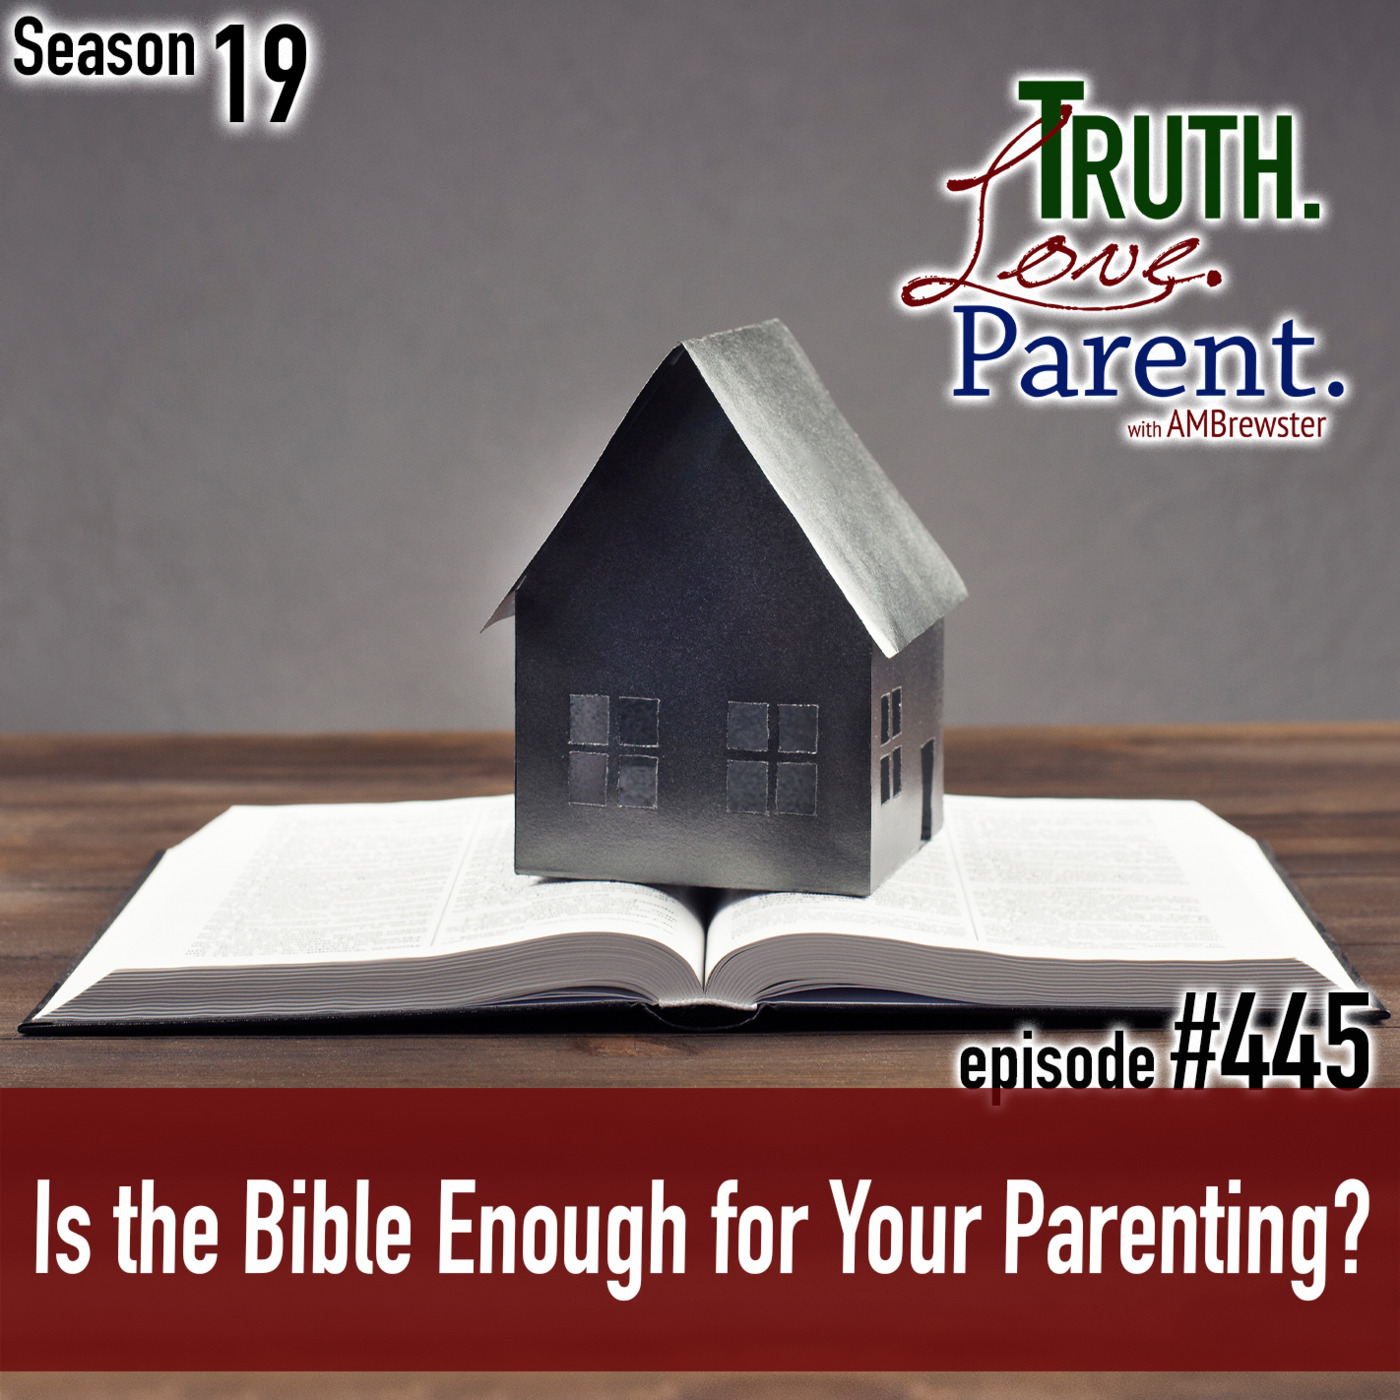 Episode 445: TLP 445: Is the Bible Enough for Your Parenting?